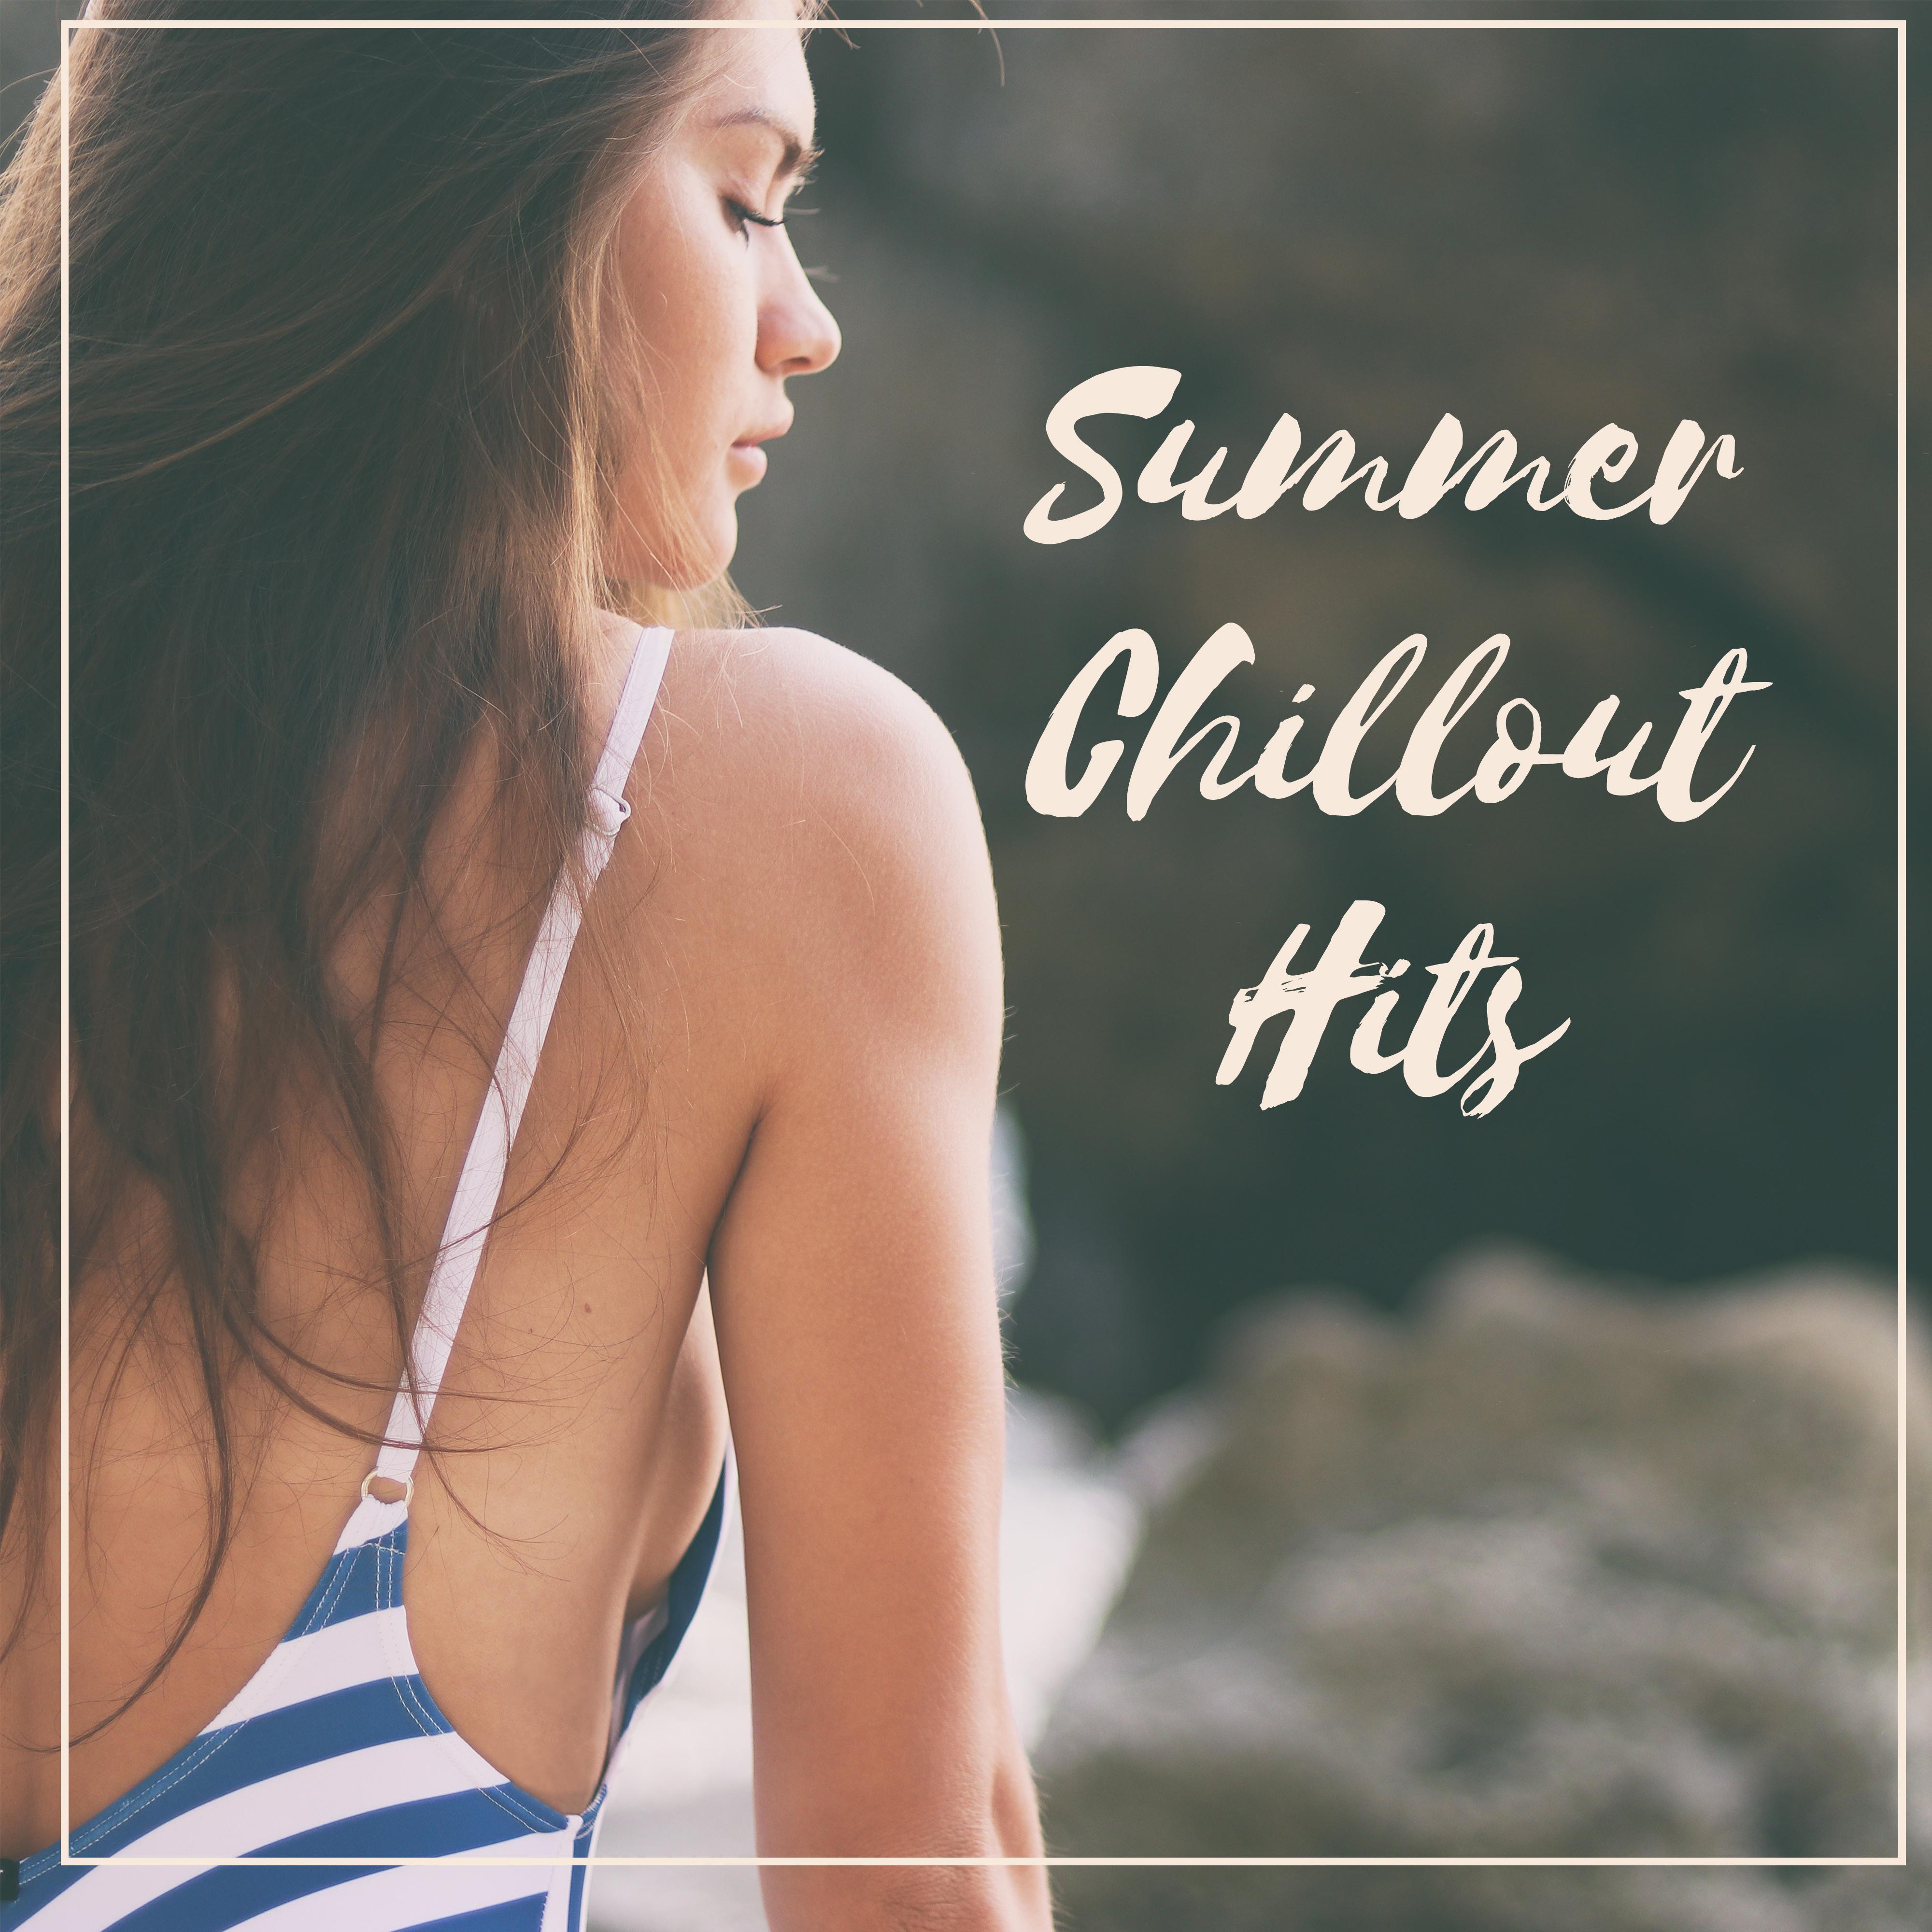 Summer Chillout Hits